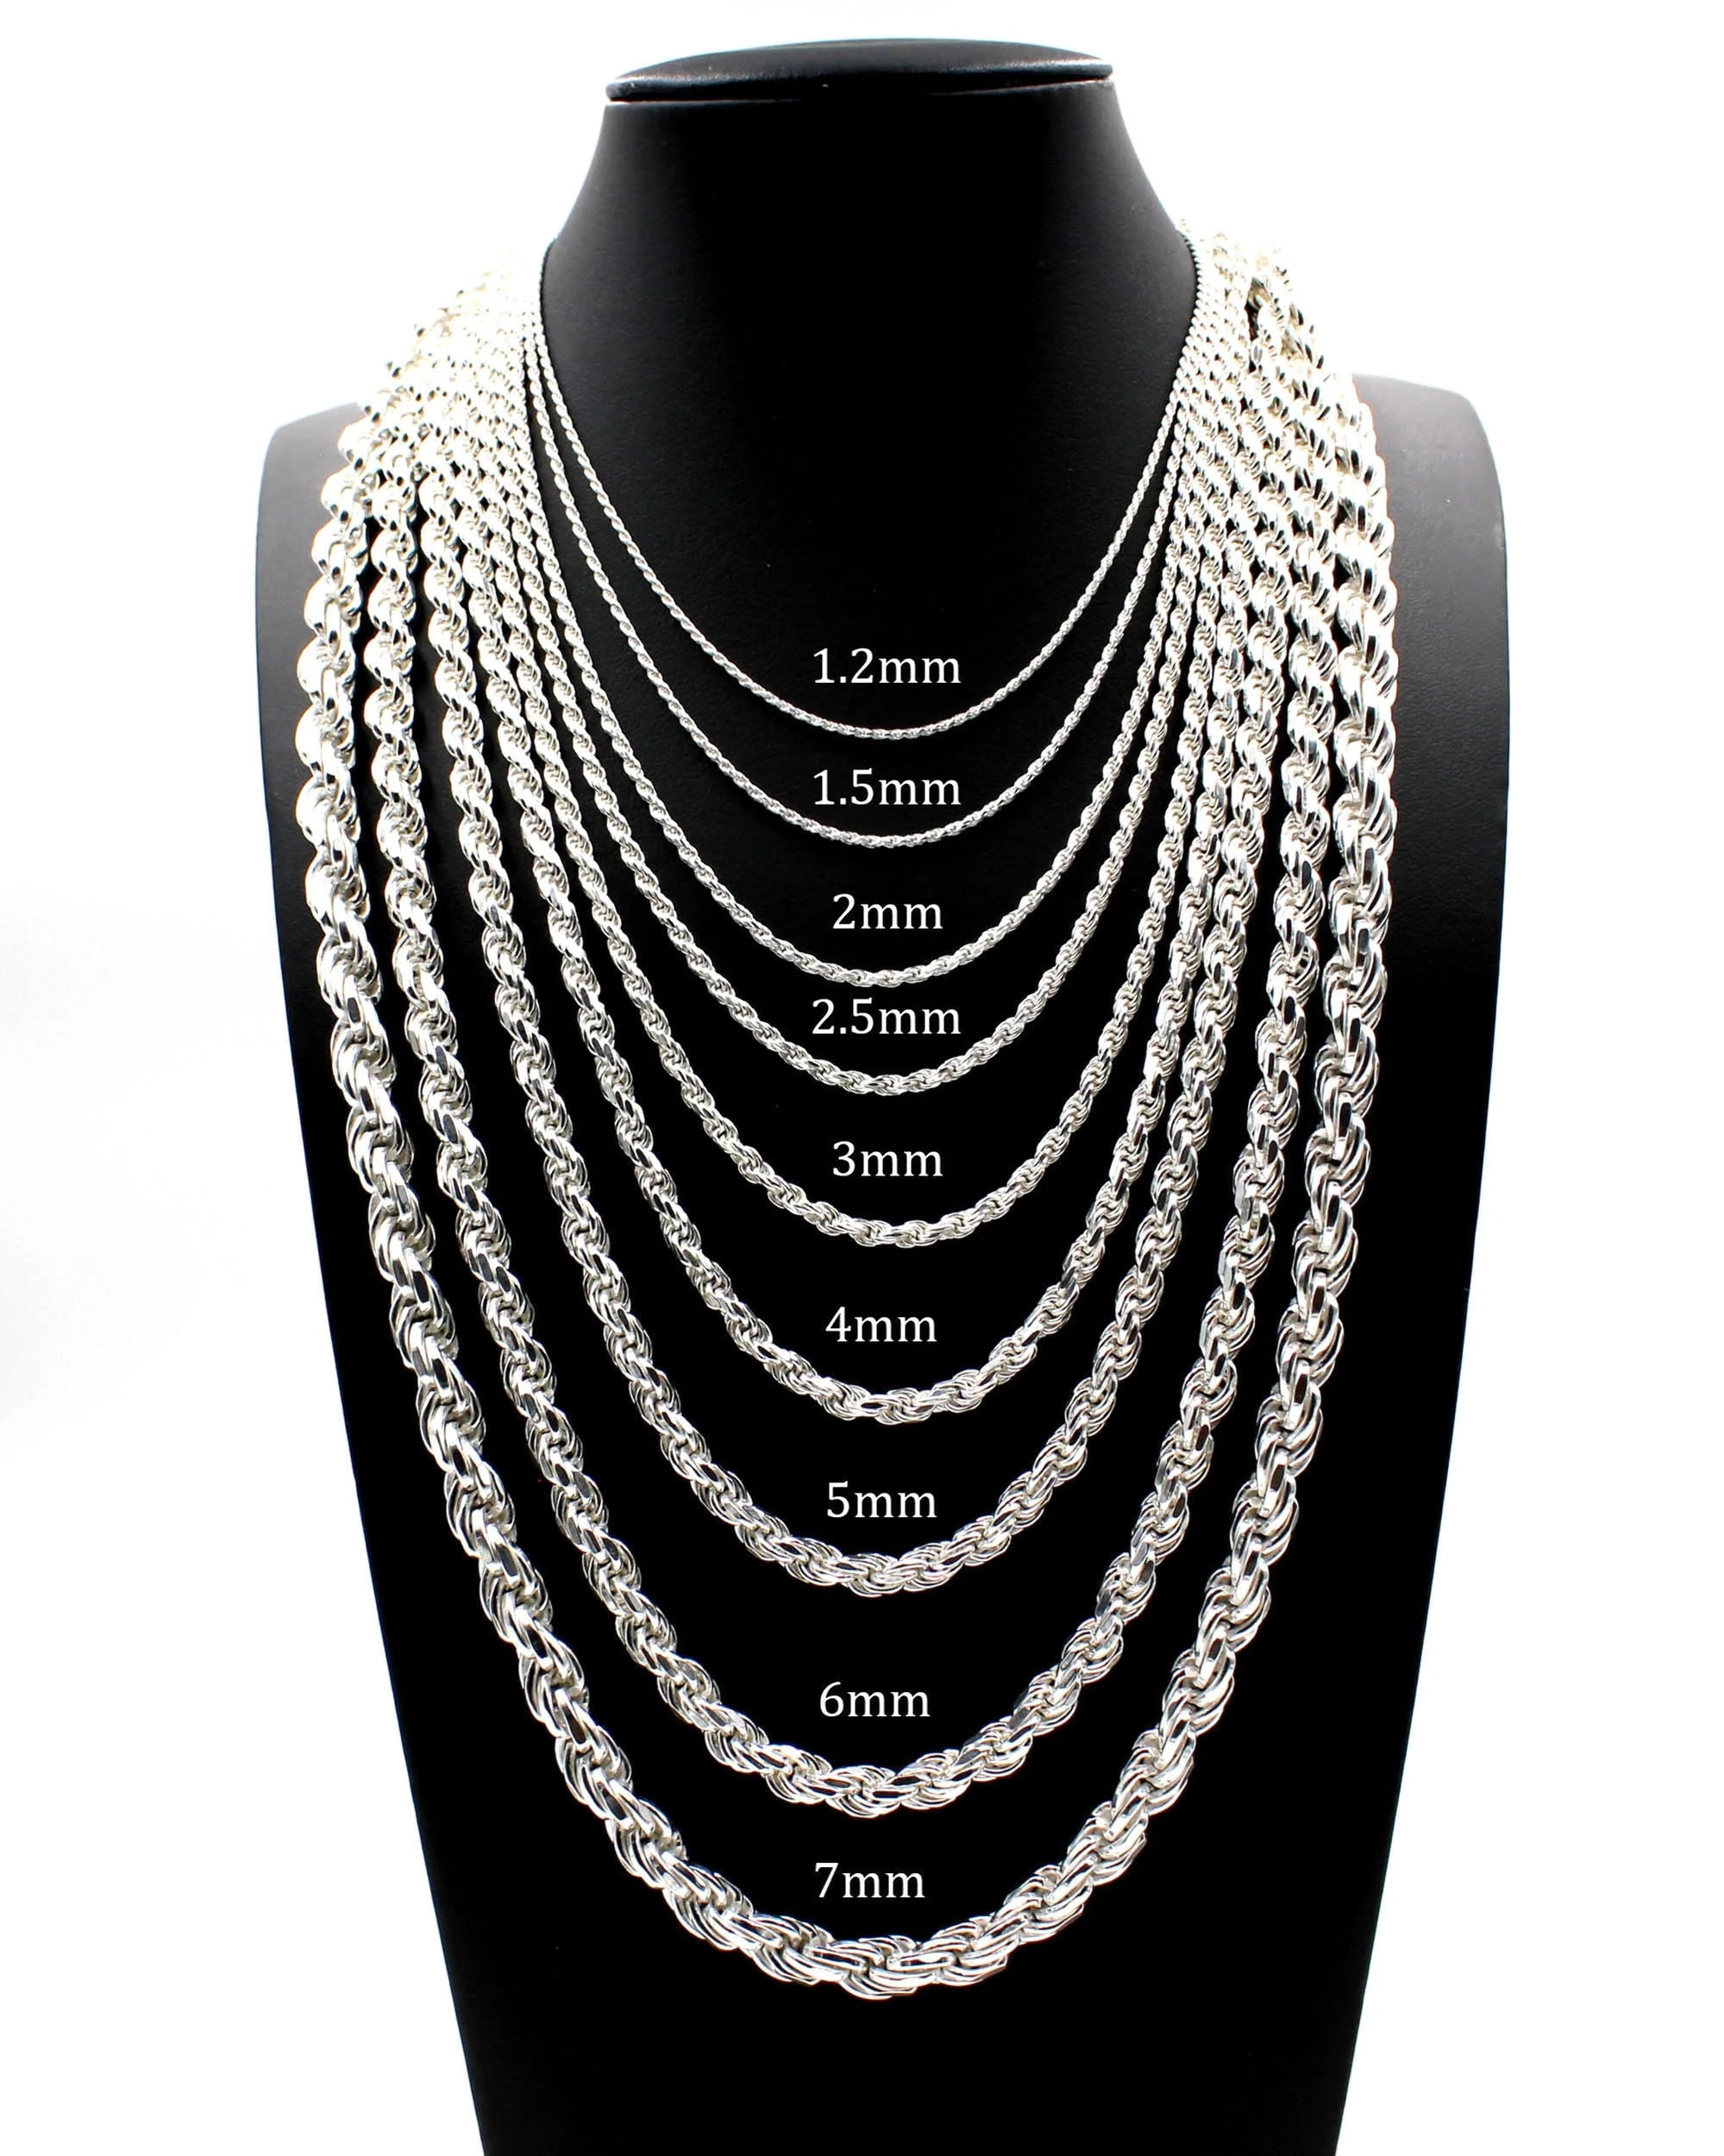 Real 925 Solid Sterling Silver Diamond-Cut Rope Chain Necklace 1.2mm 1.5mm  2mm 2.5mm 3mm 4mm 5mm 6mm 7mm 